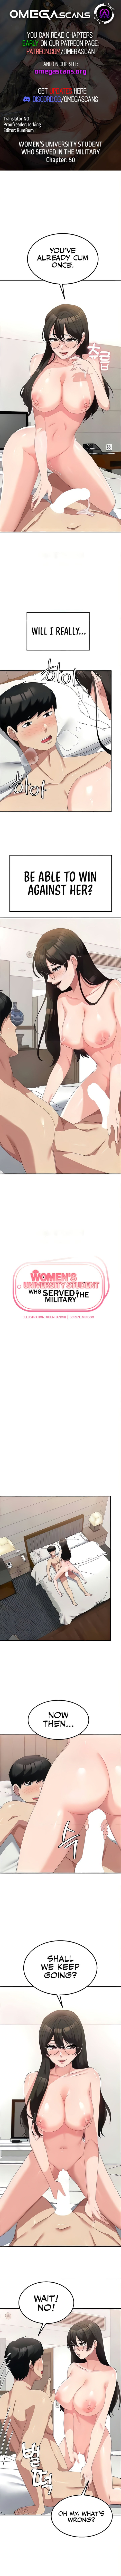 womens-university-student-who-served-in-the-military-chap-50-0